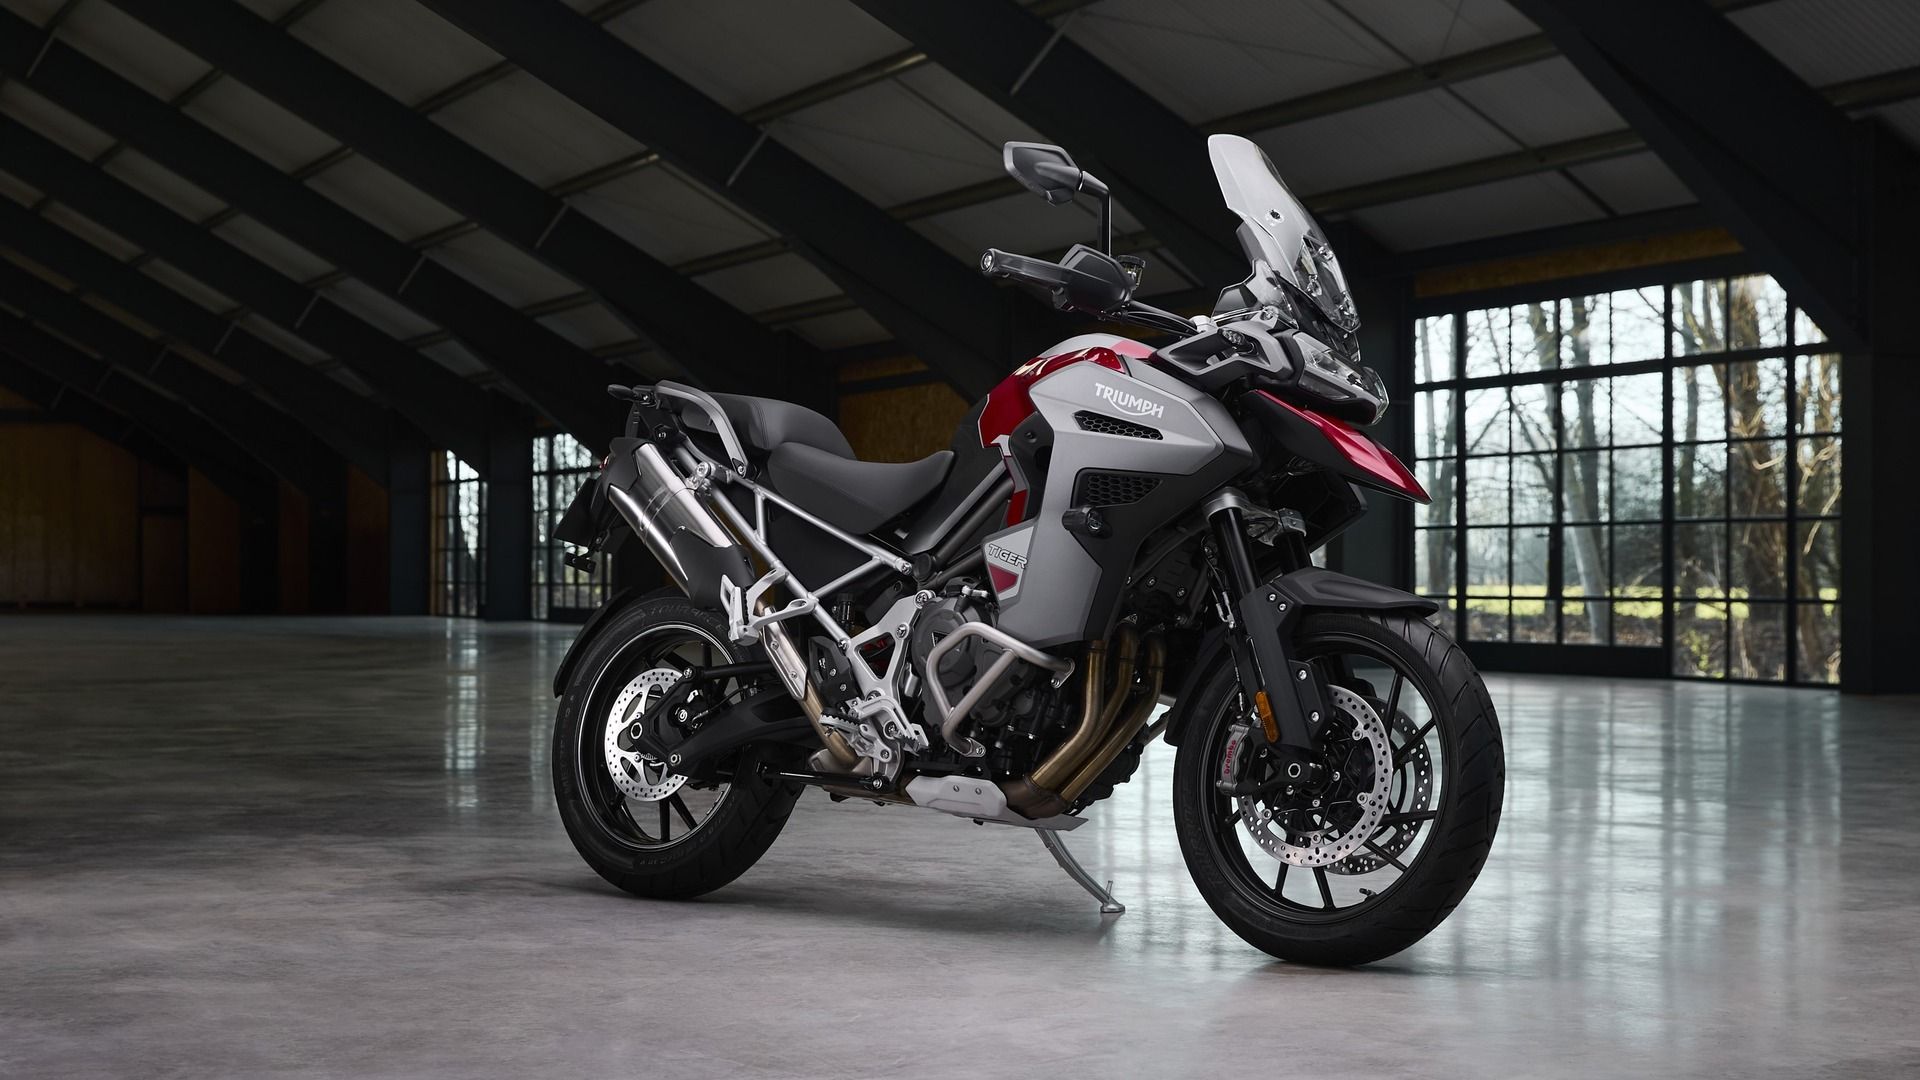 2024 Triumph Tiger 1200 Range First Look: Ready To Take On BMW?